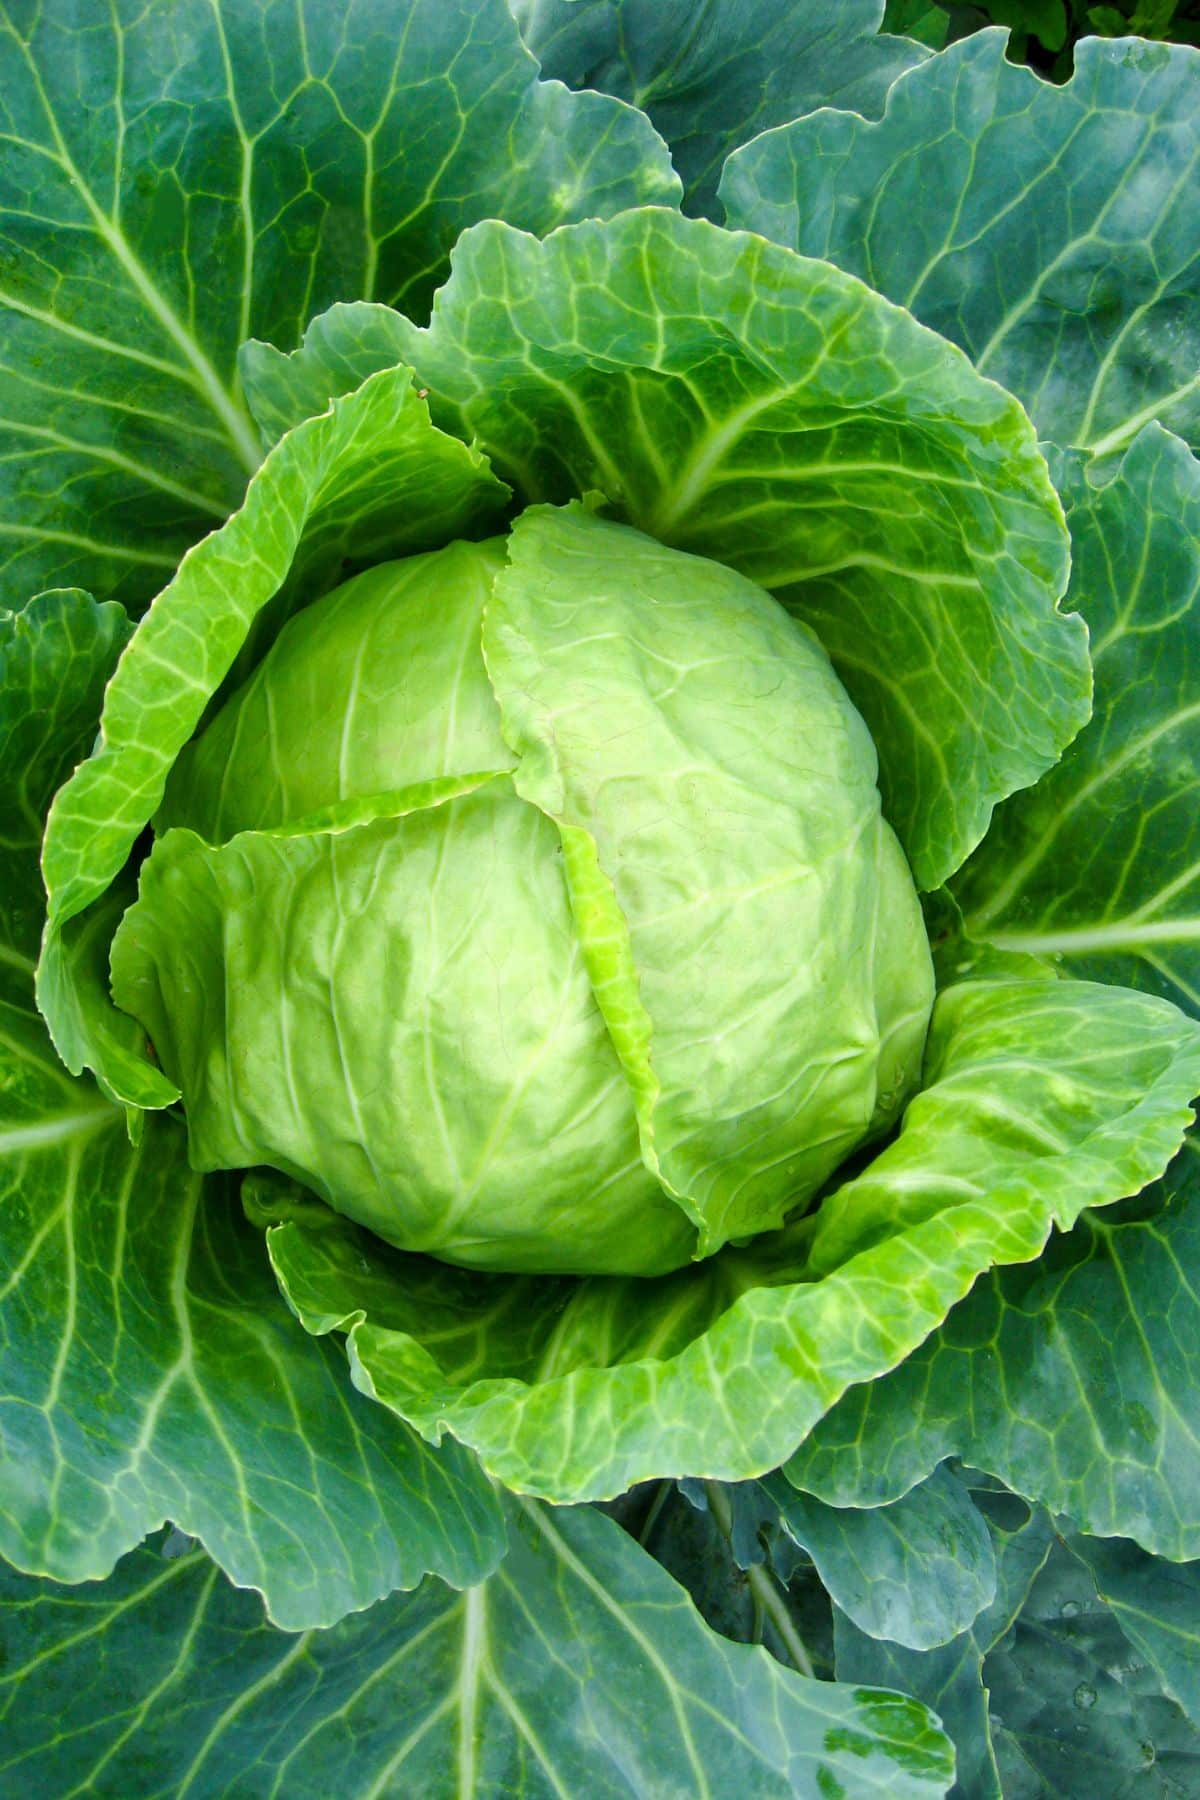 is cabbage keto friendly